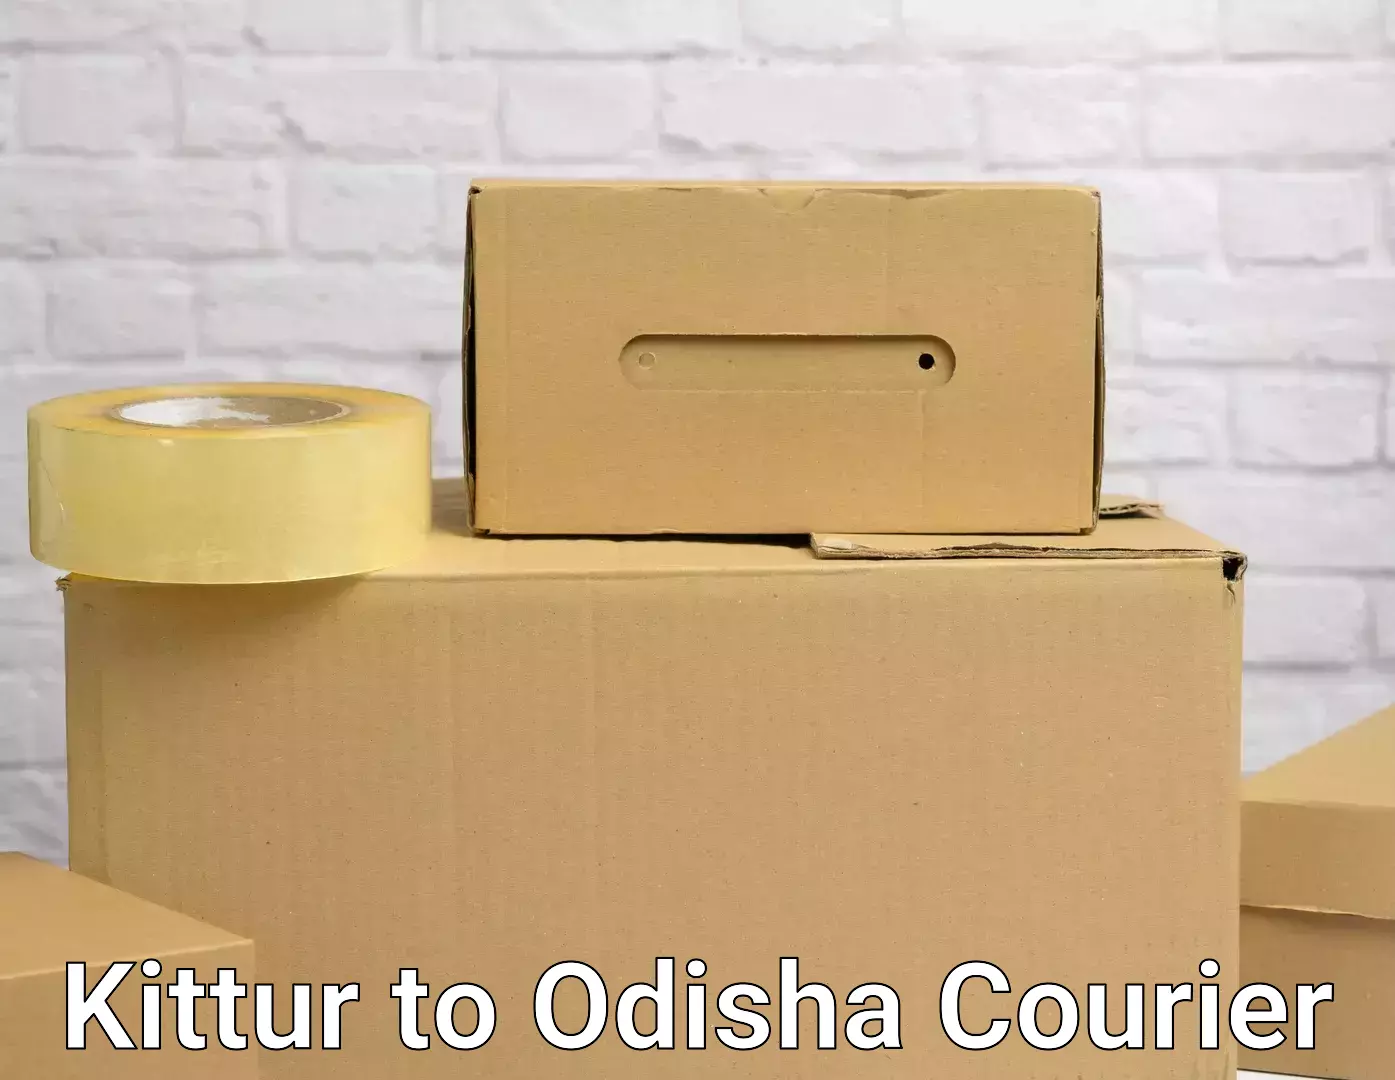 Budget-friendly movers in Kittur to Odisha